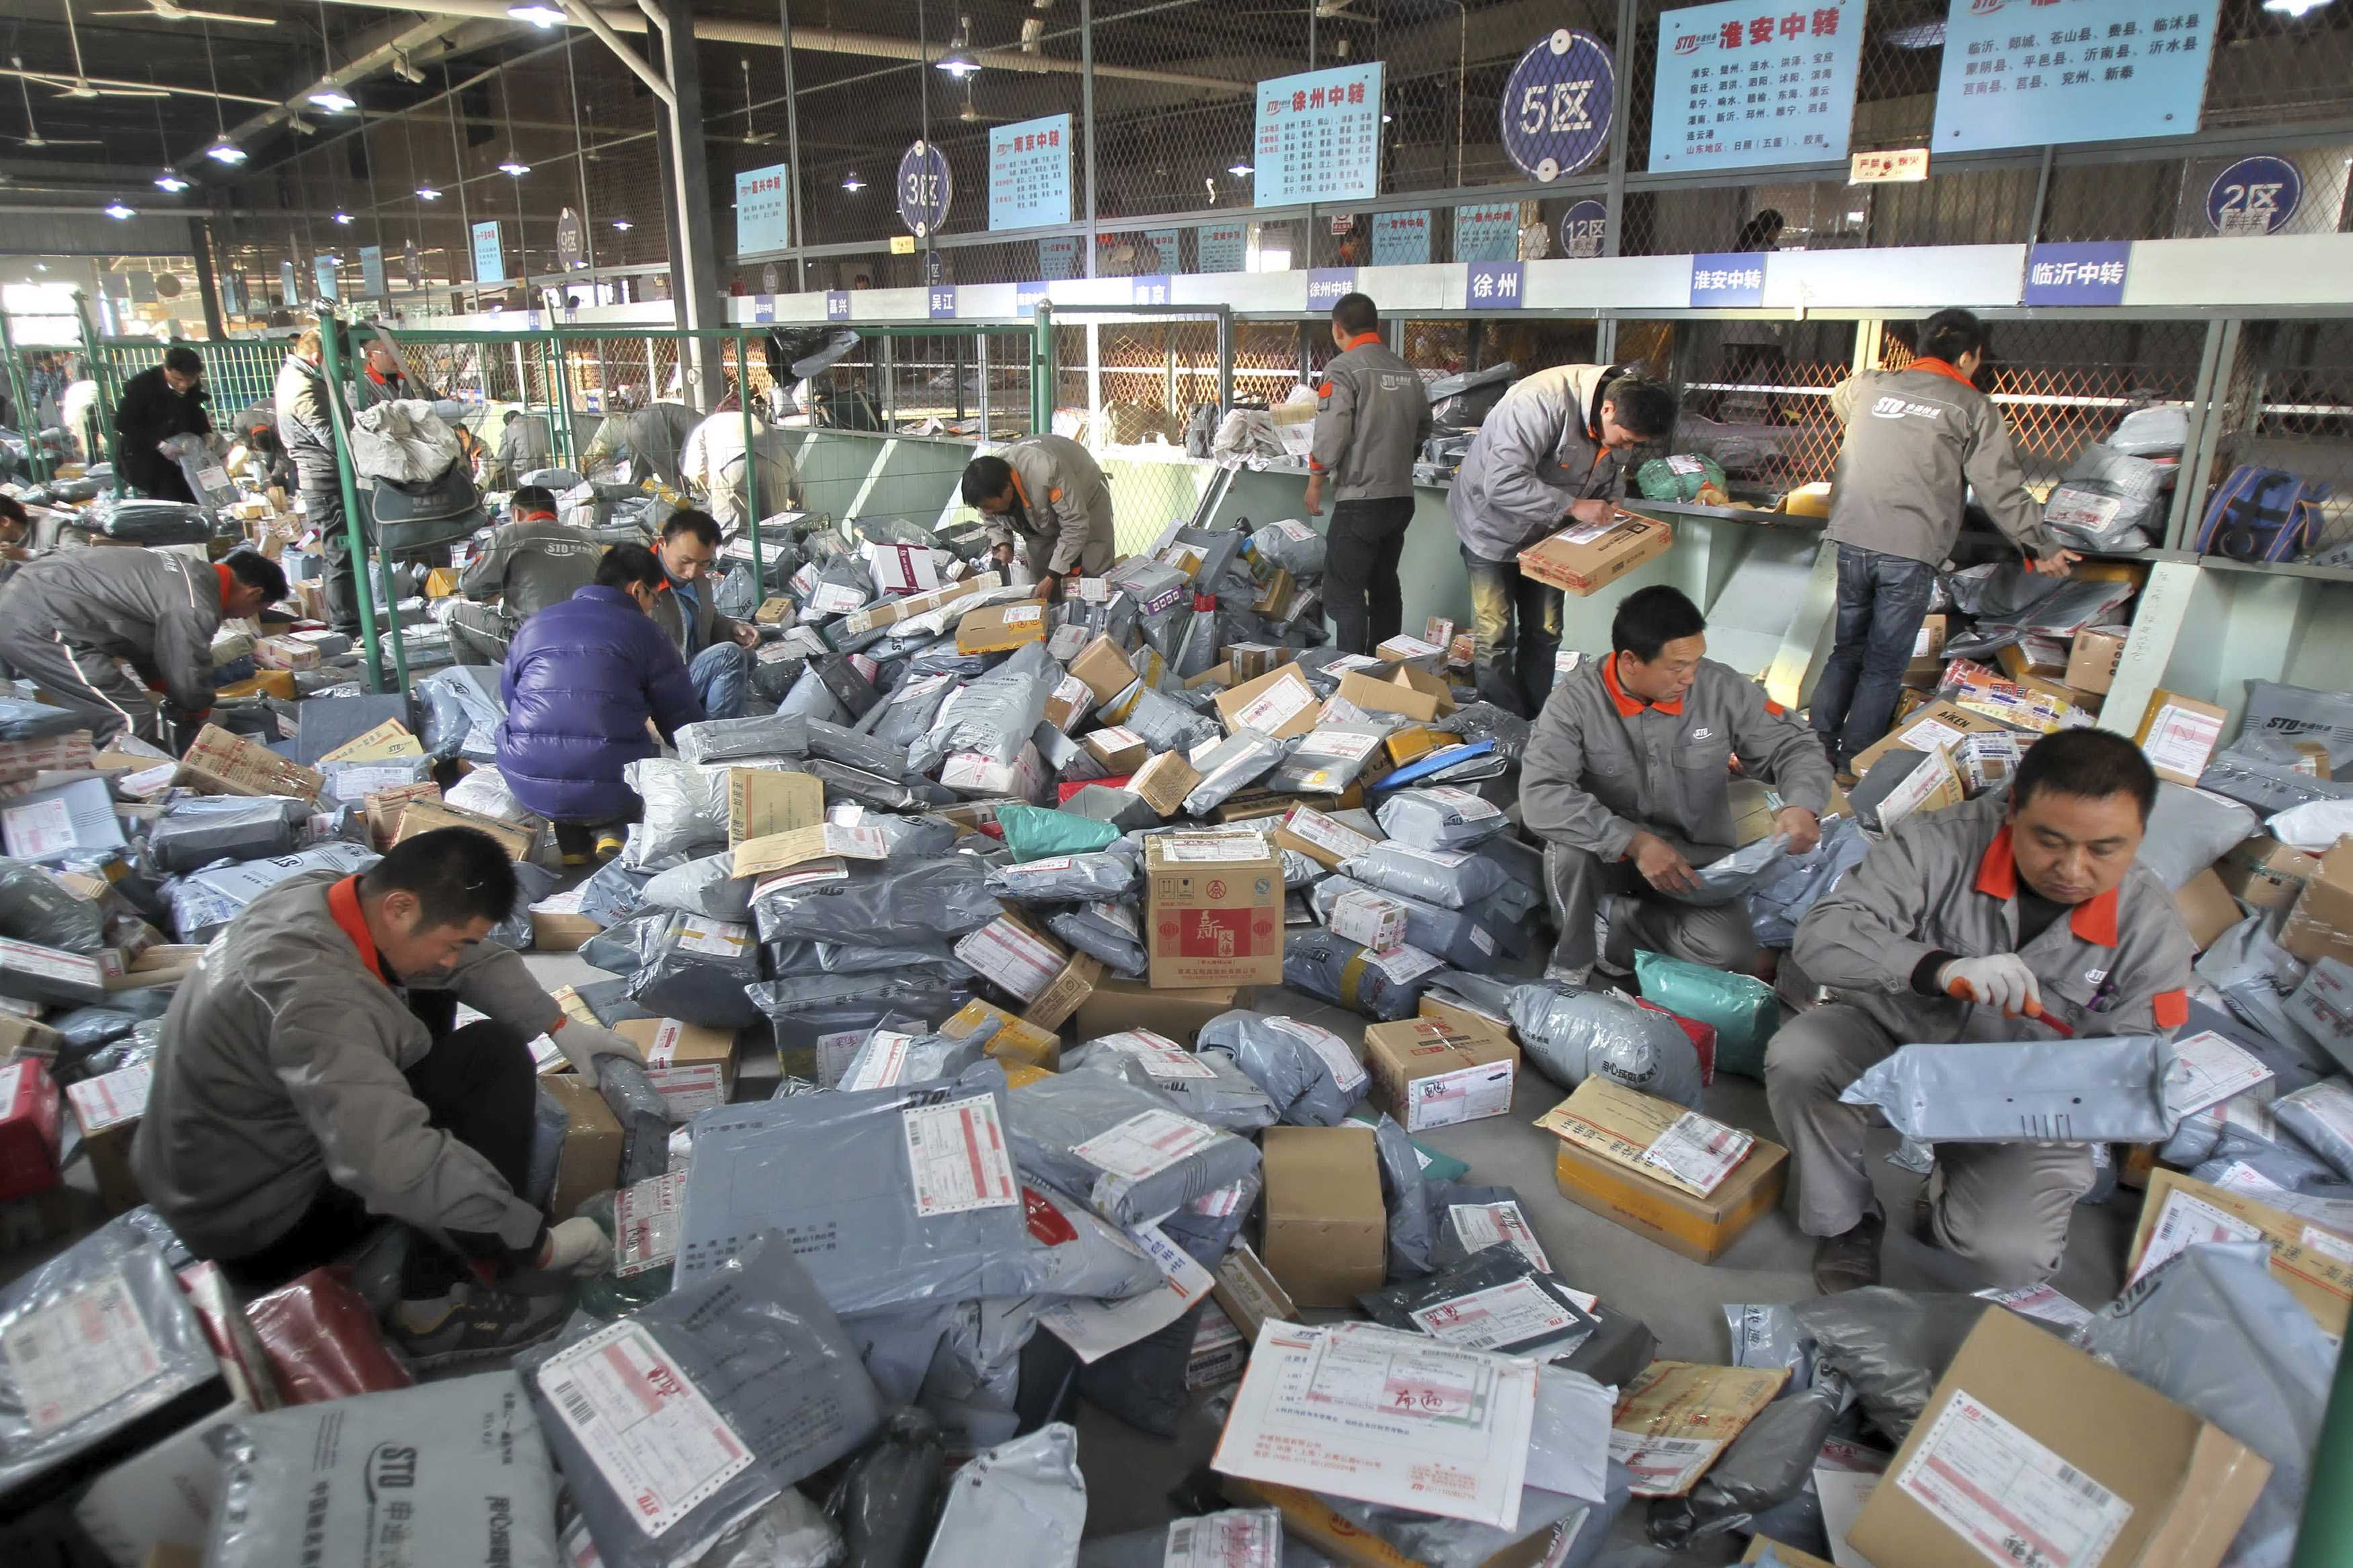 Workers sort out packages at an express delivery company in China's Jiangsu province. Photo: Reuters